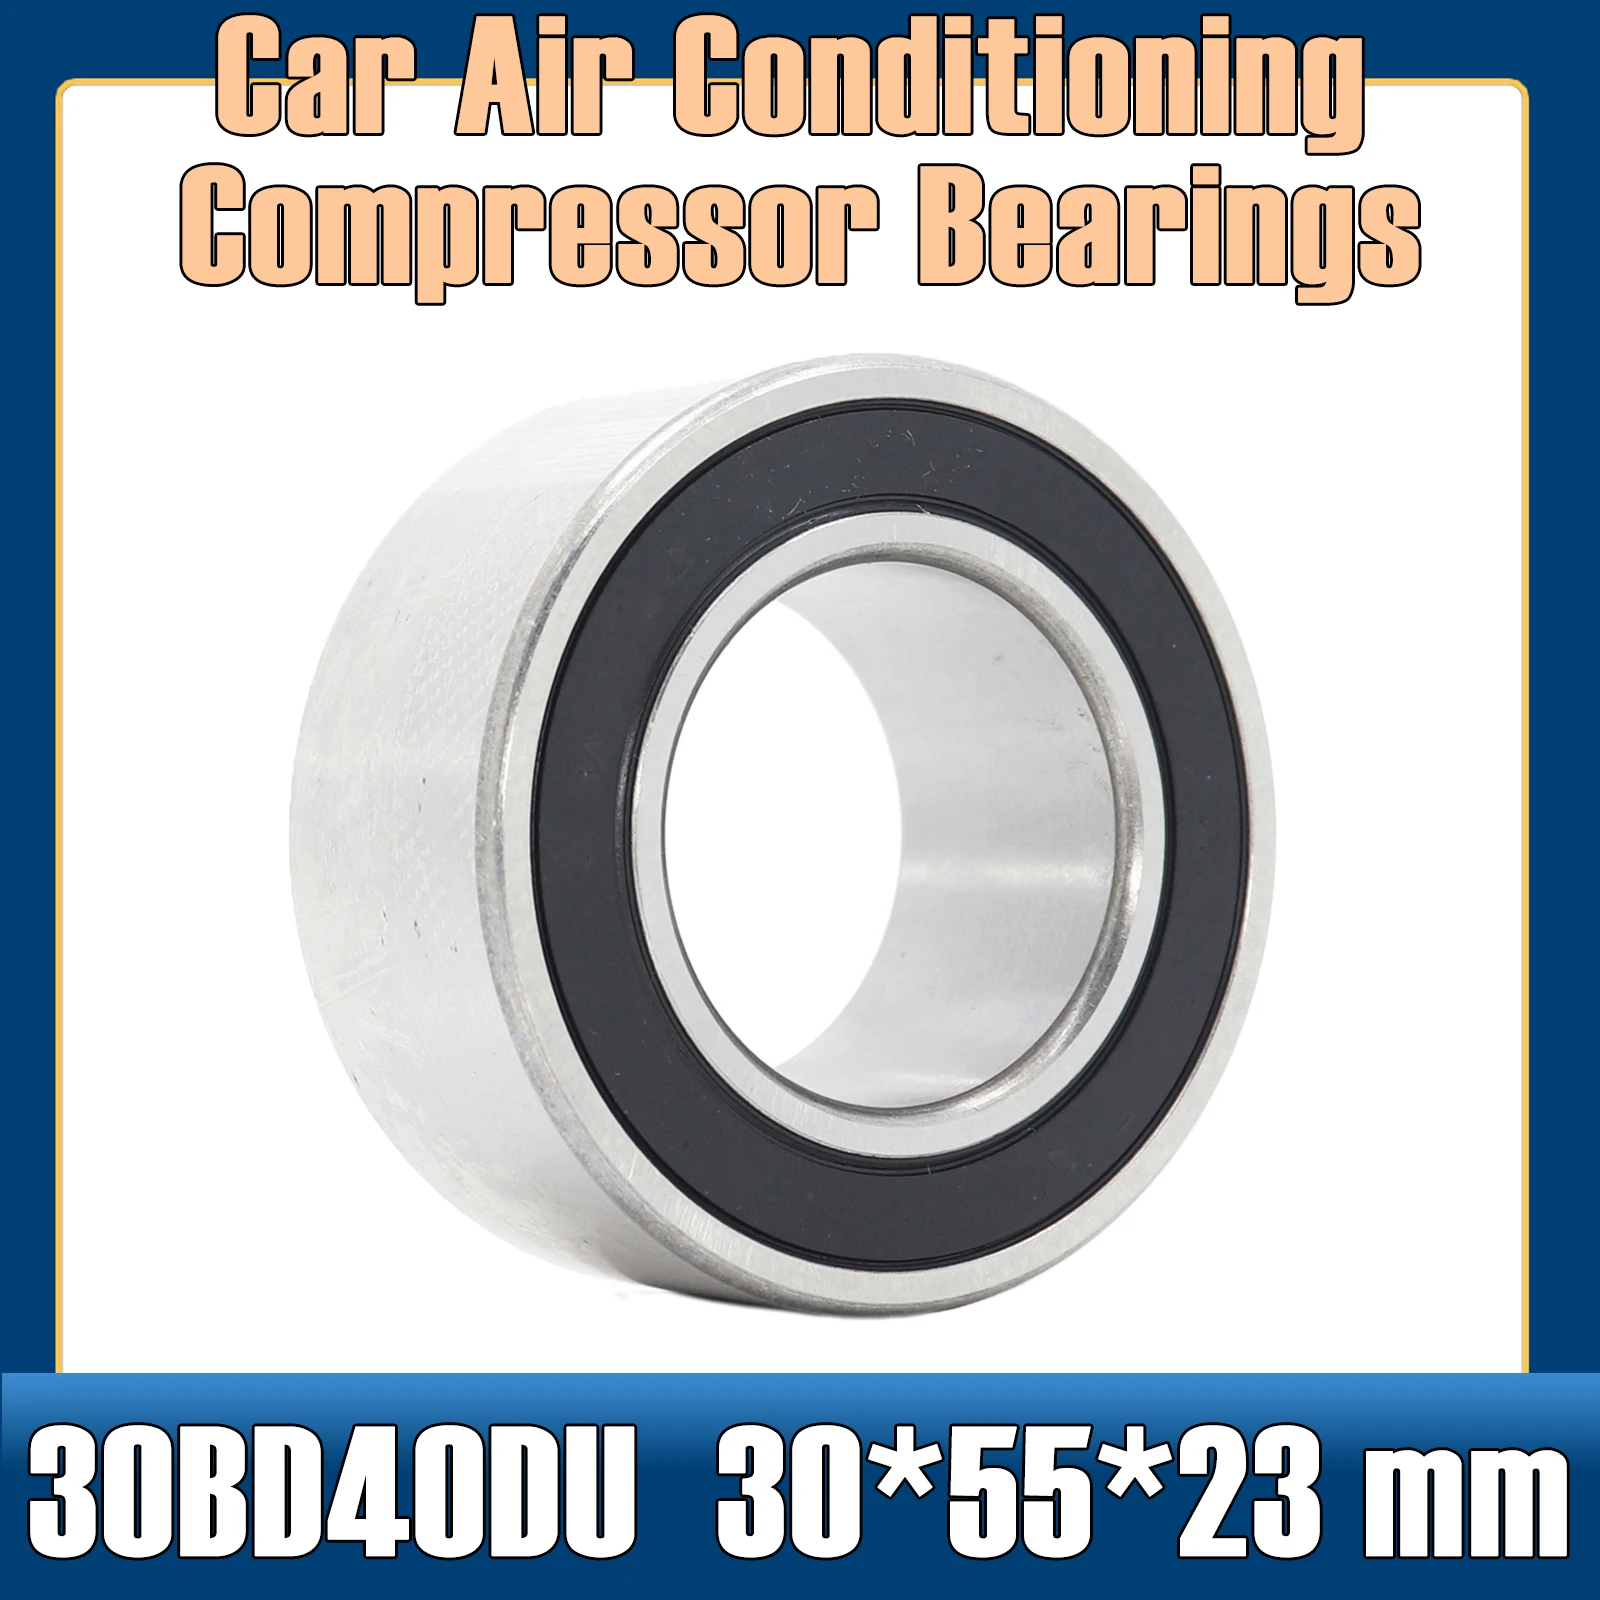 

30BD40DU-2RS Bearing 30*55*23 mm ( 1 PC ) ABEC-5 Car Air Conditioning Compressor Bearings Double Sealed 30BD40DF 2RS 305523